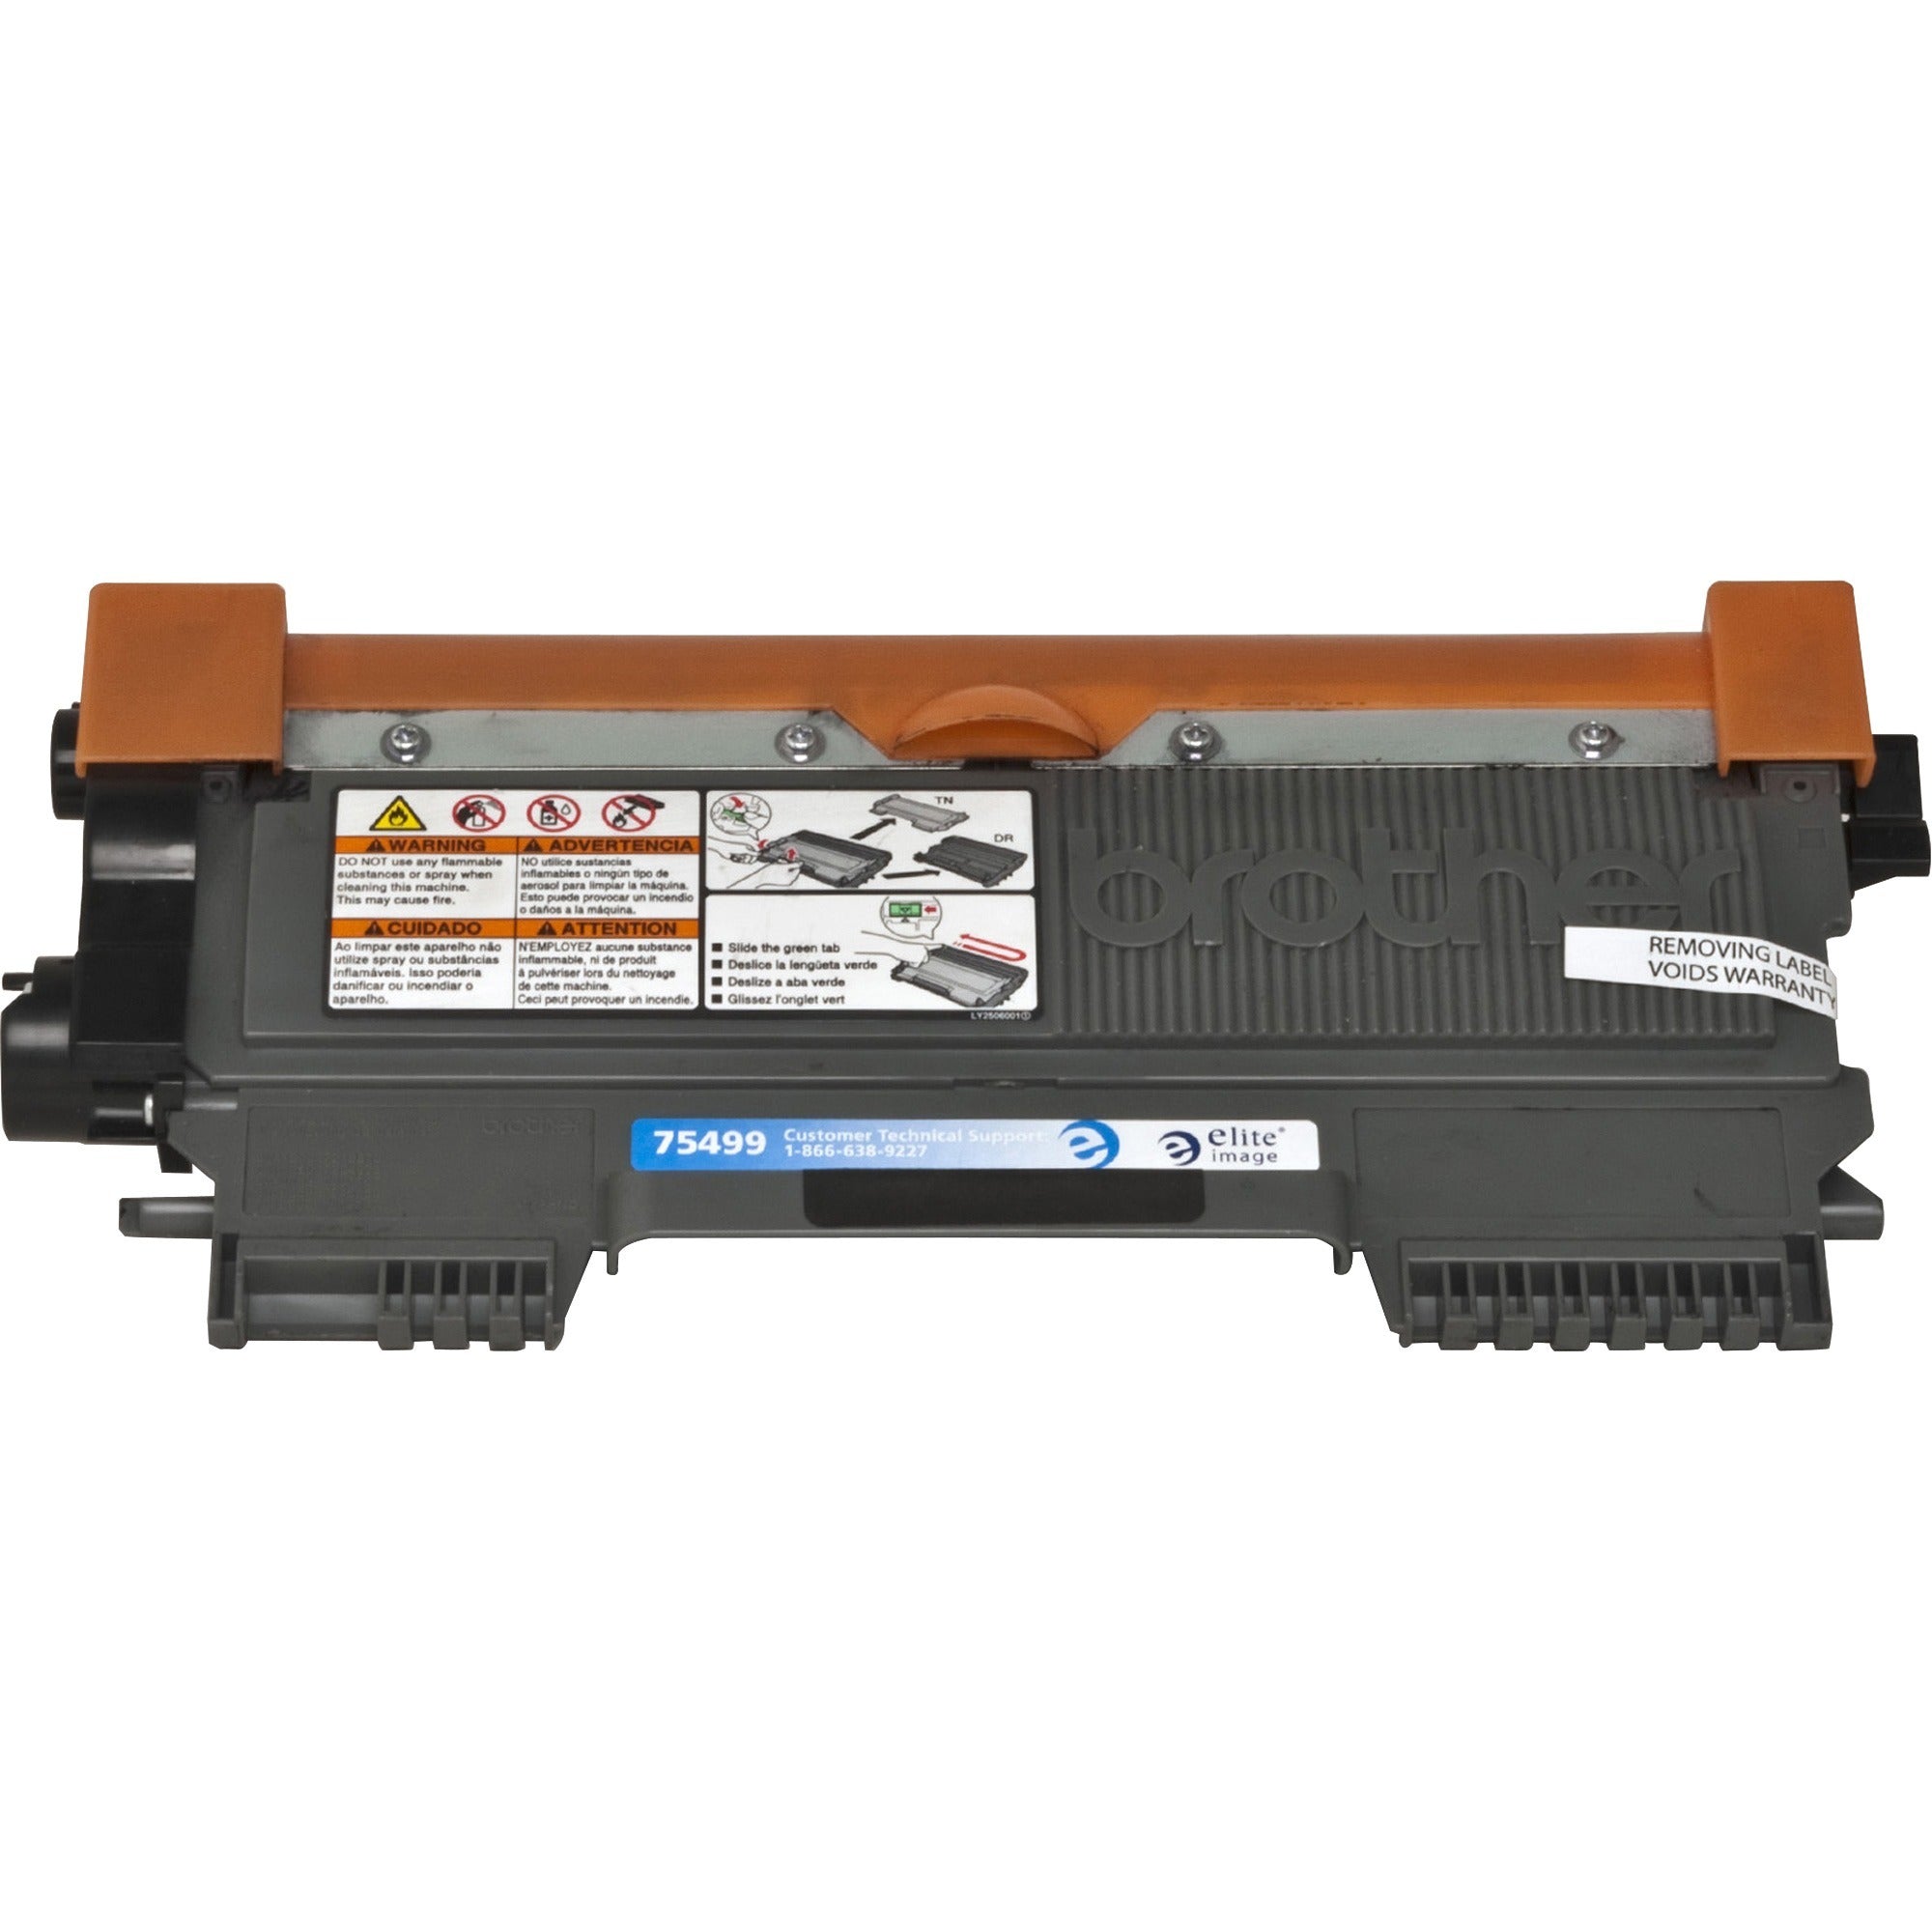 Elite Image Remanufactured High Yield Laser Toner Cartridge - Alternative for Brother TN450 - Black - 1 Each - 2600 Pages - 2